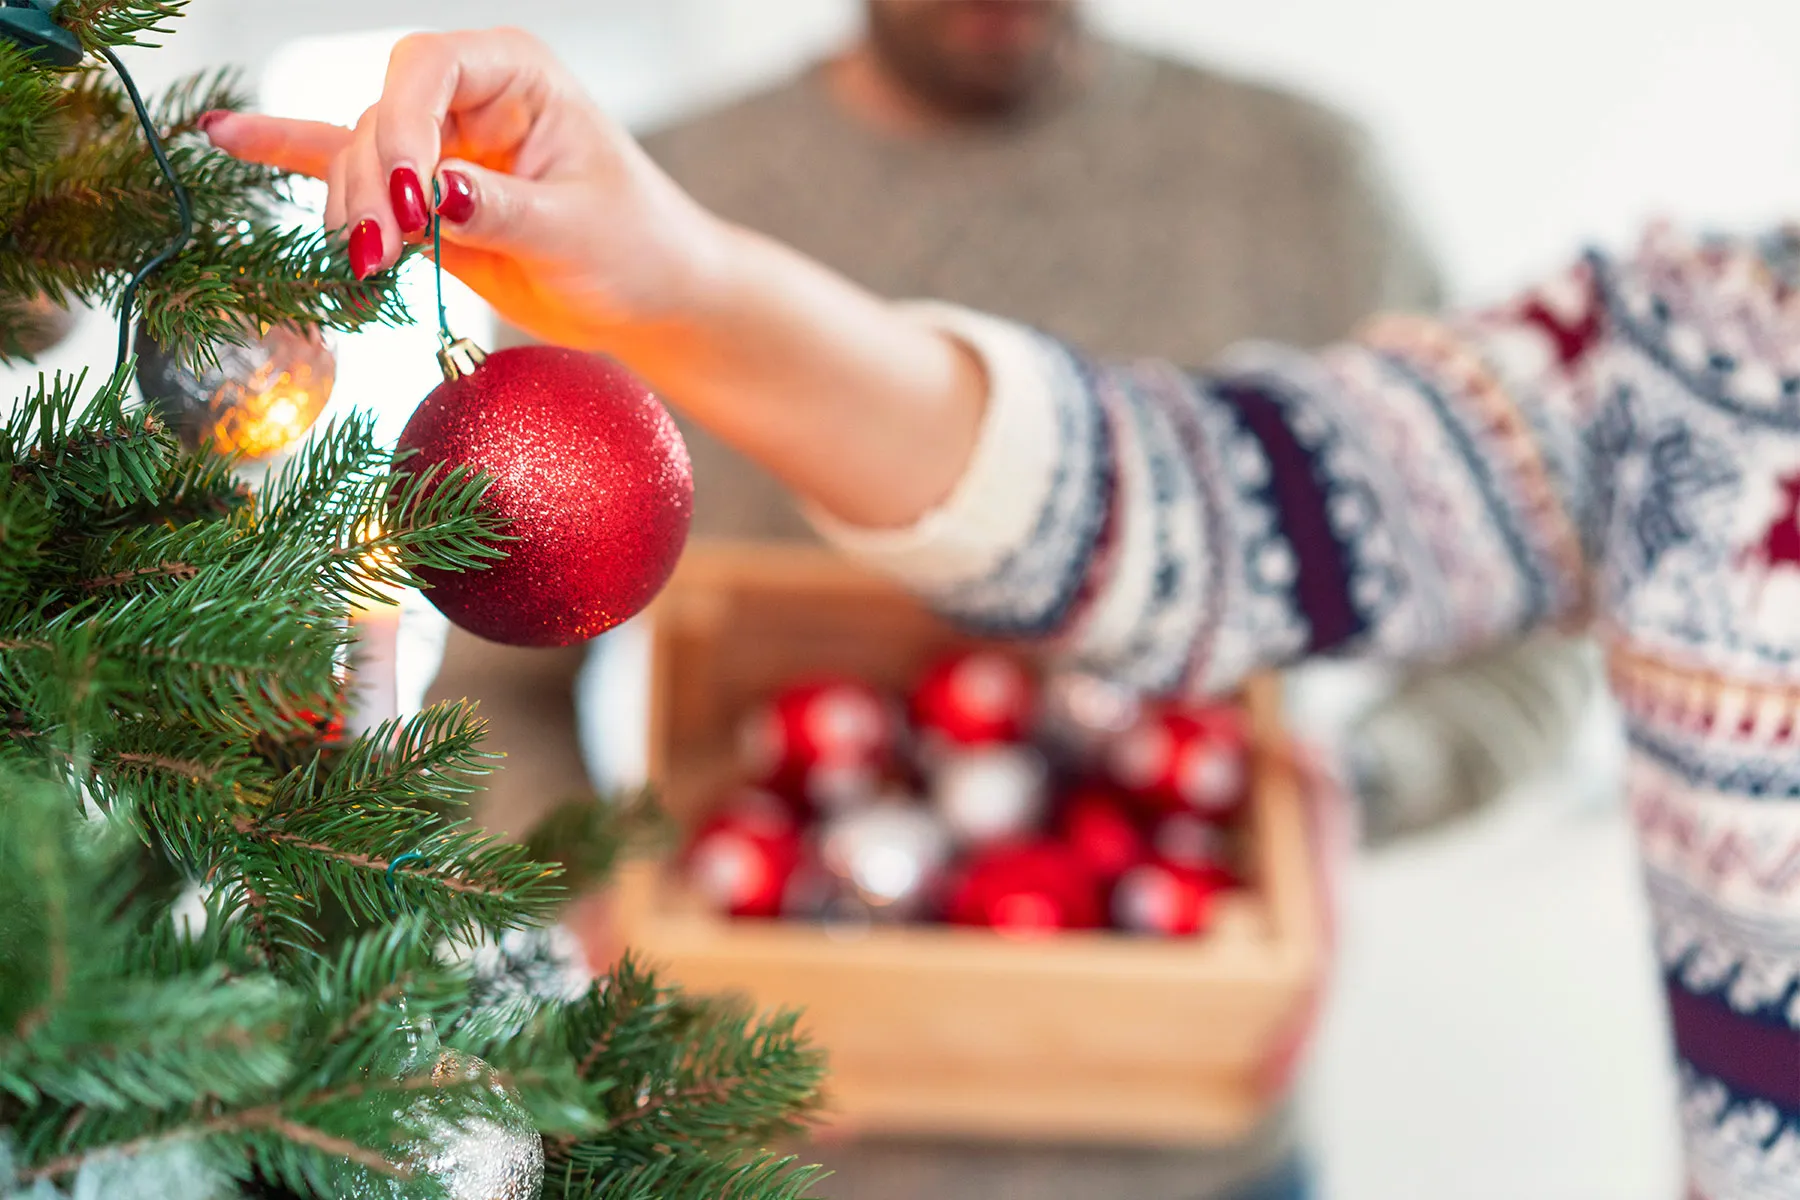 Clean the Christmas Tree and Keep It Toxin-Free